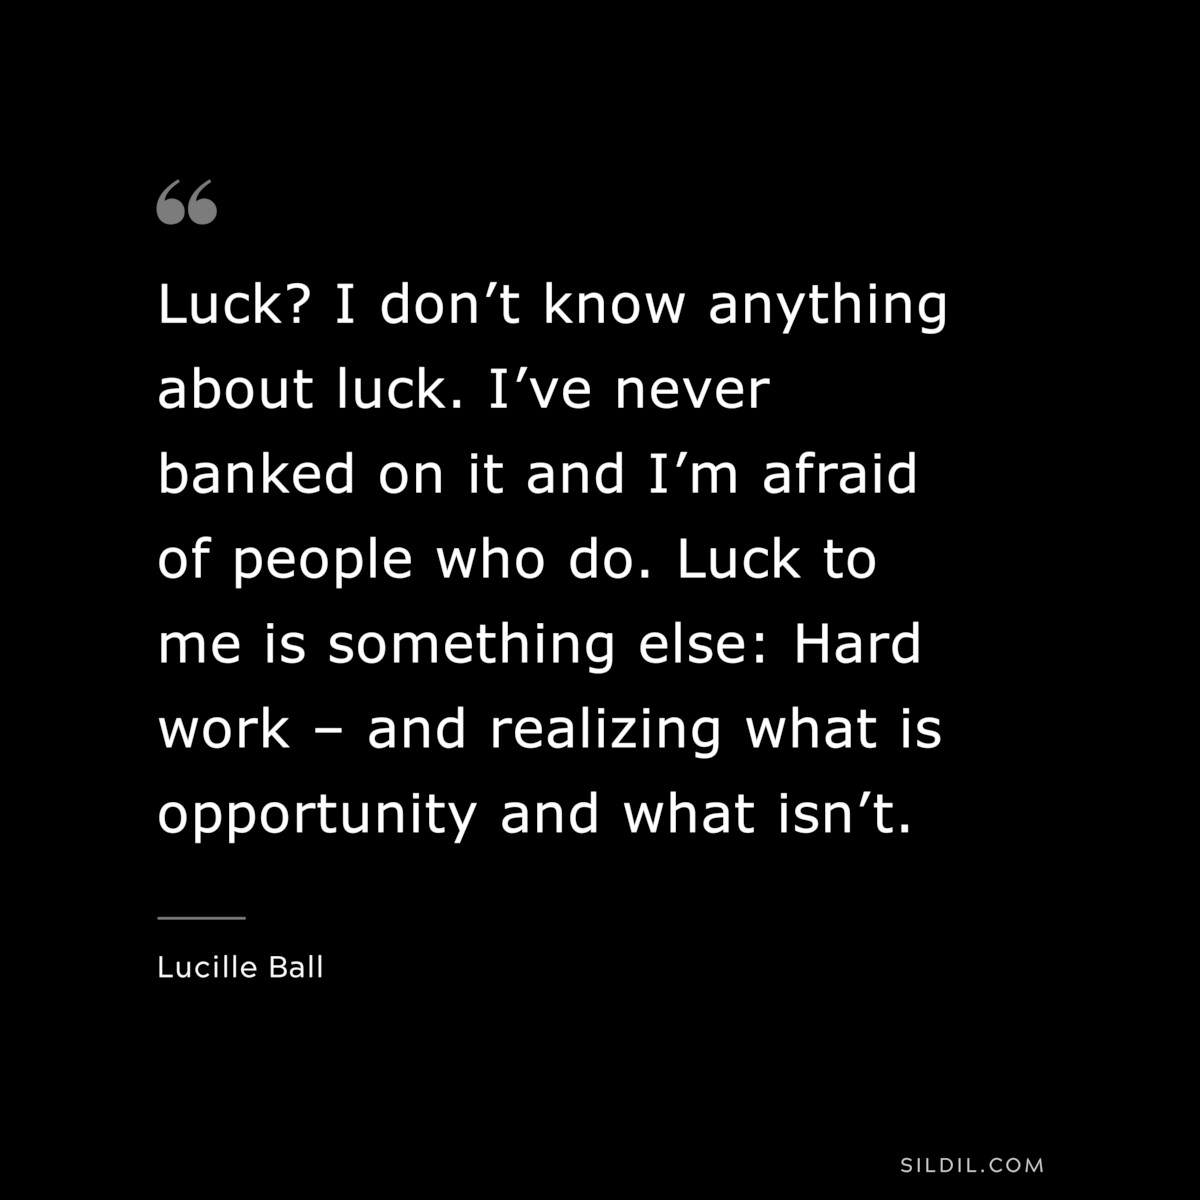 Luck? I don’t know anything about luck. I’ve never banked on it and I’m afraid of people who do. Luck to me is something else: Hard work – and realizing what is opportunity and what isn’t. ― Lucille Ball